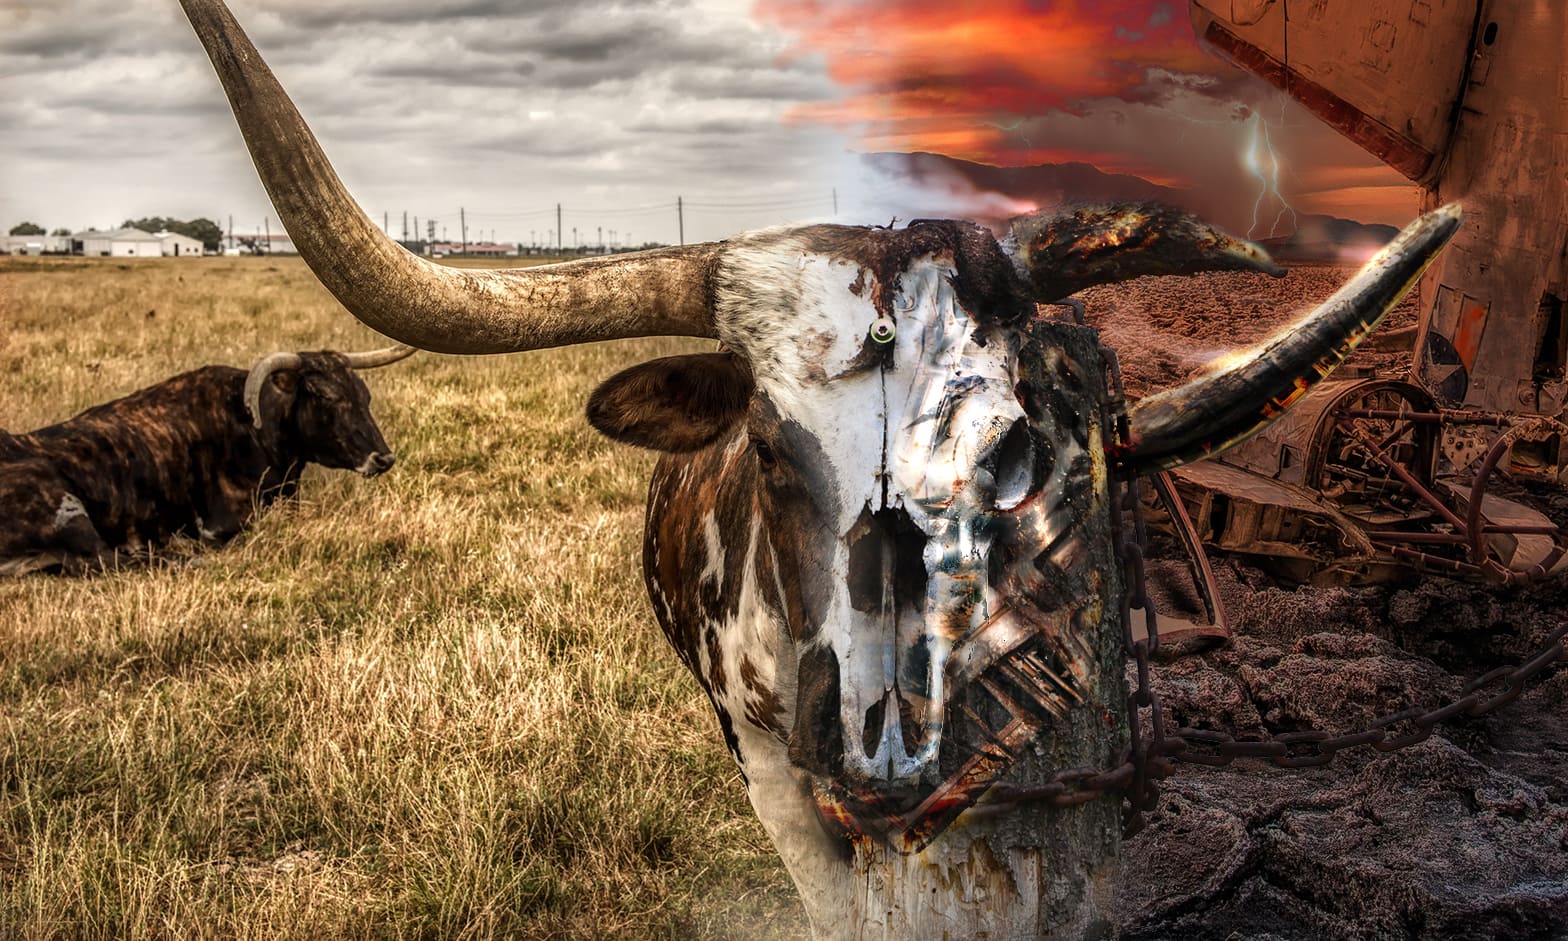 Article Header Design: “Losing Texas to Climate Change and the COVID-19?”